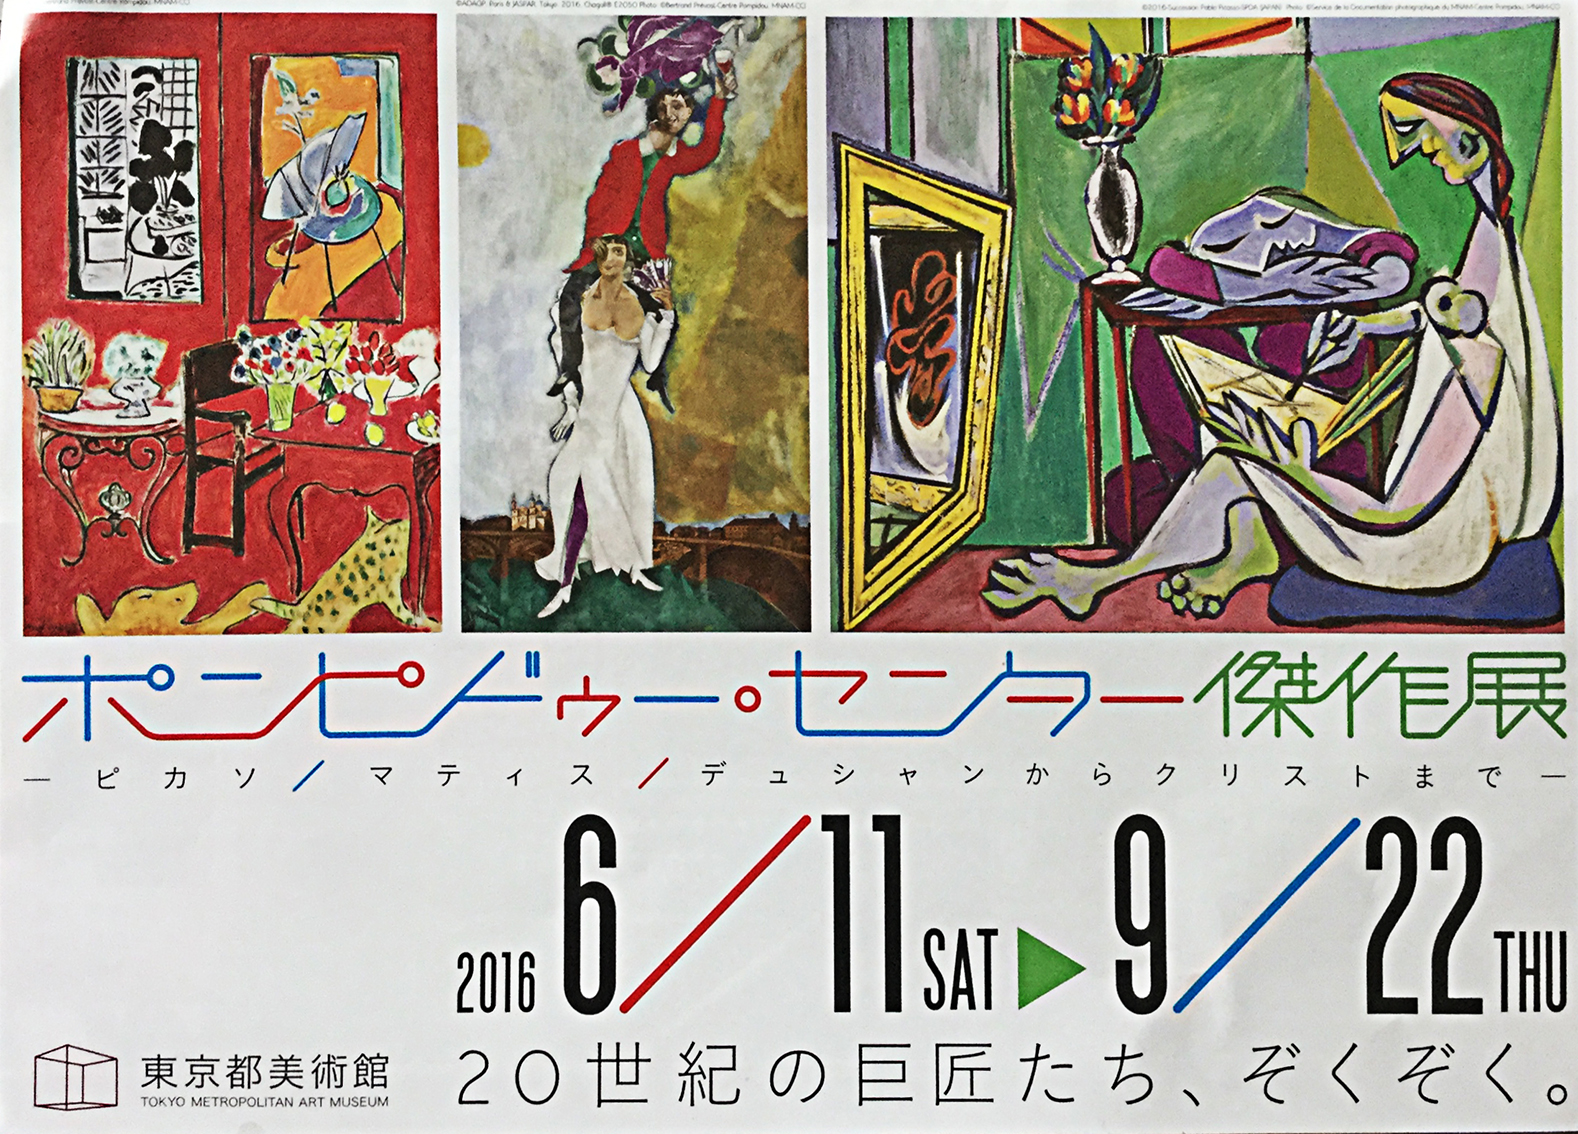 brochure from the Metropolitan Art Museum Ueno, with dates, times and three images.